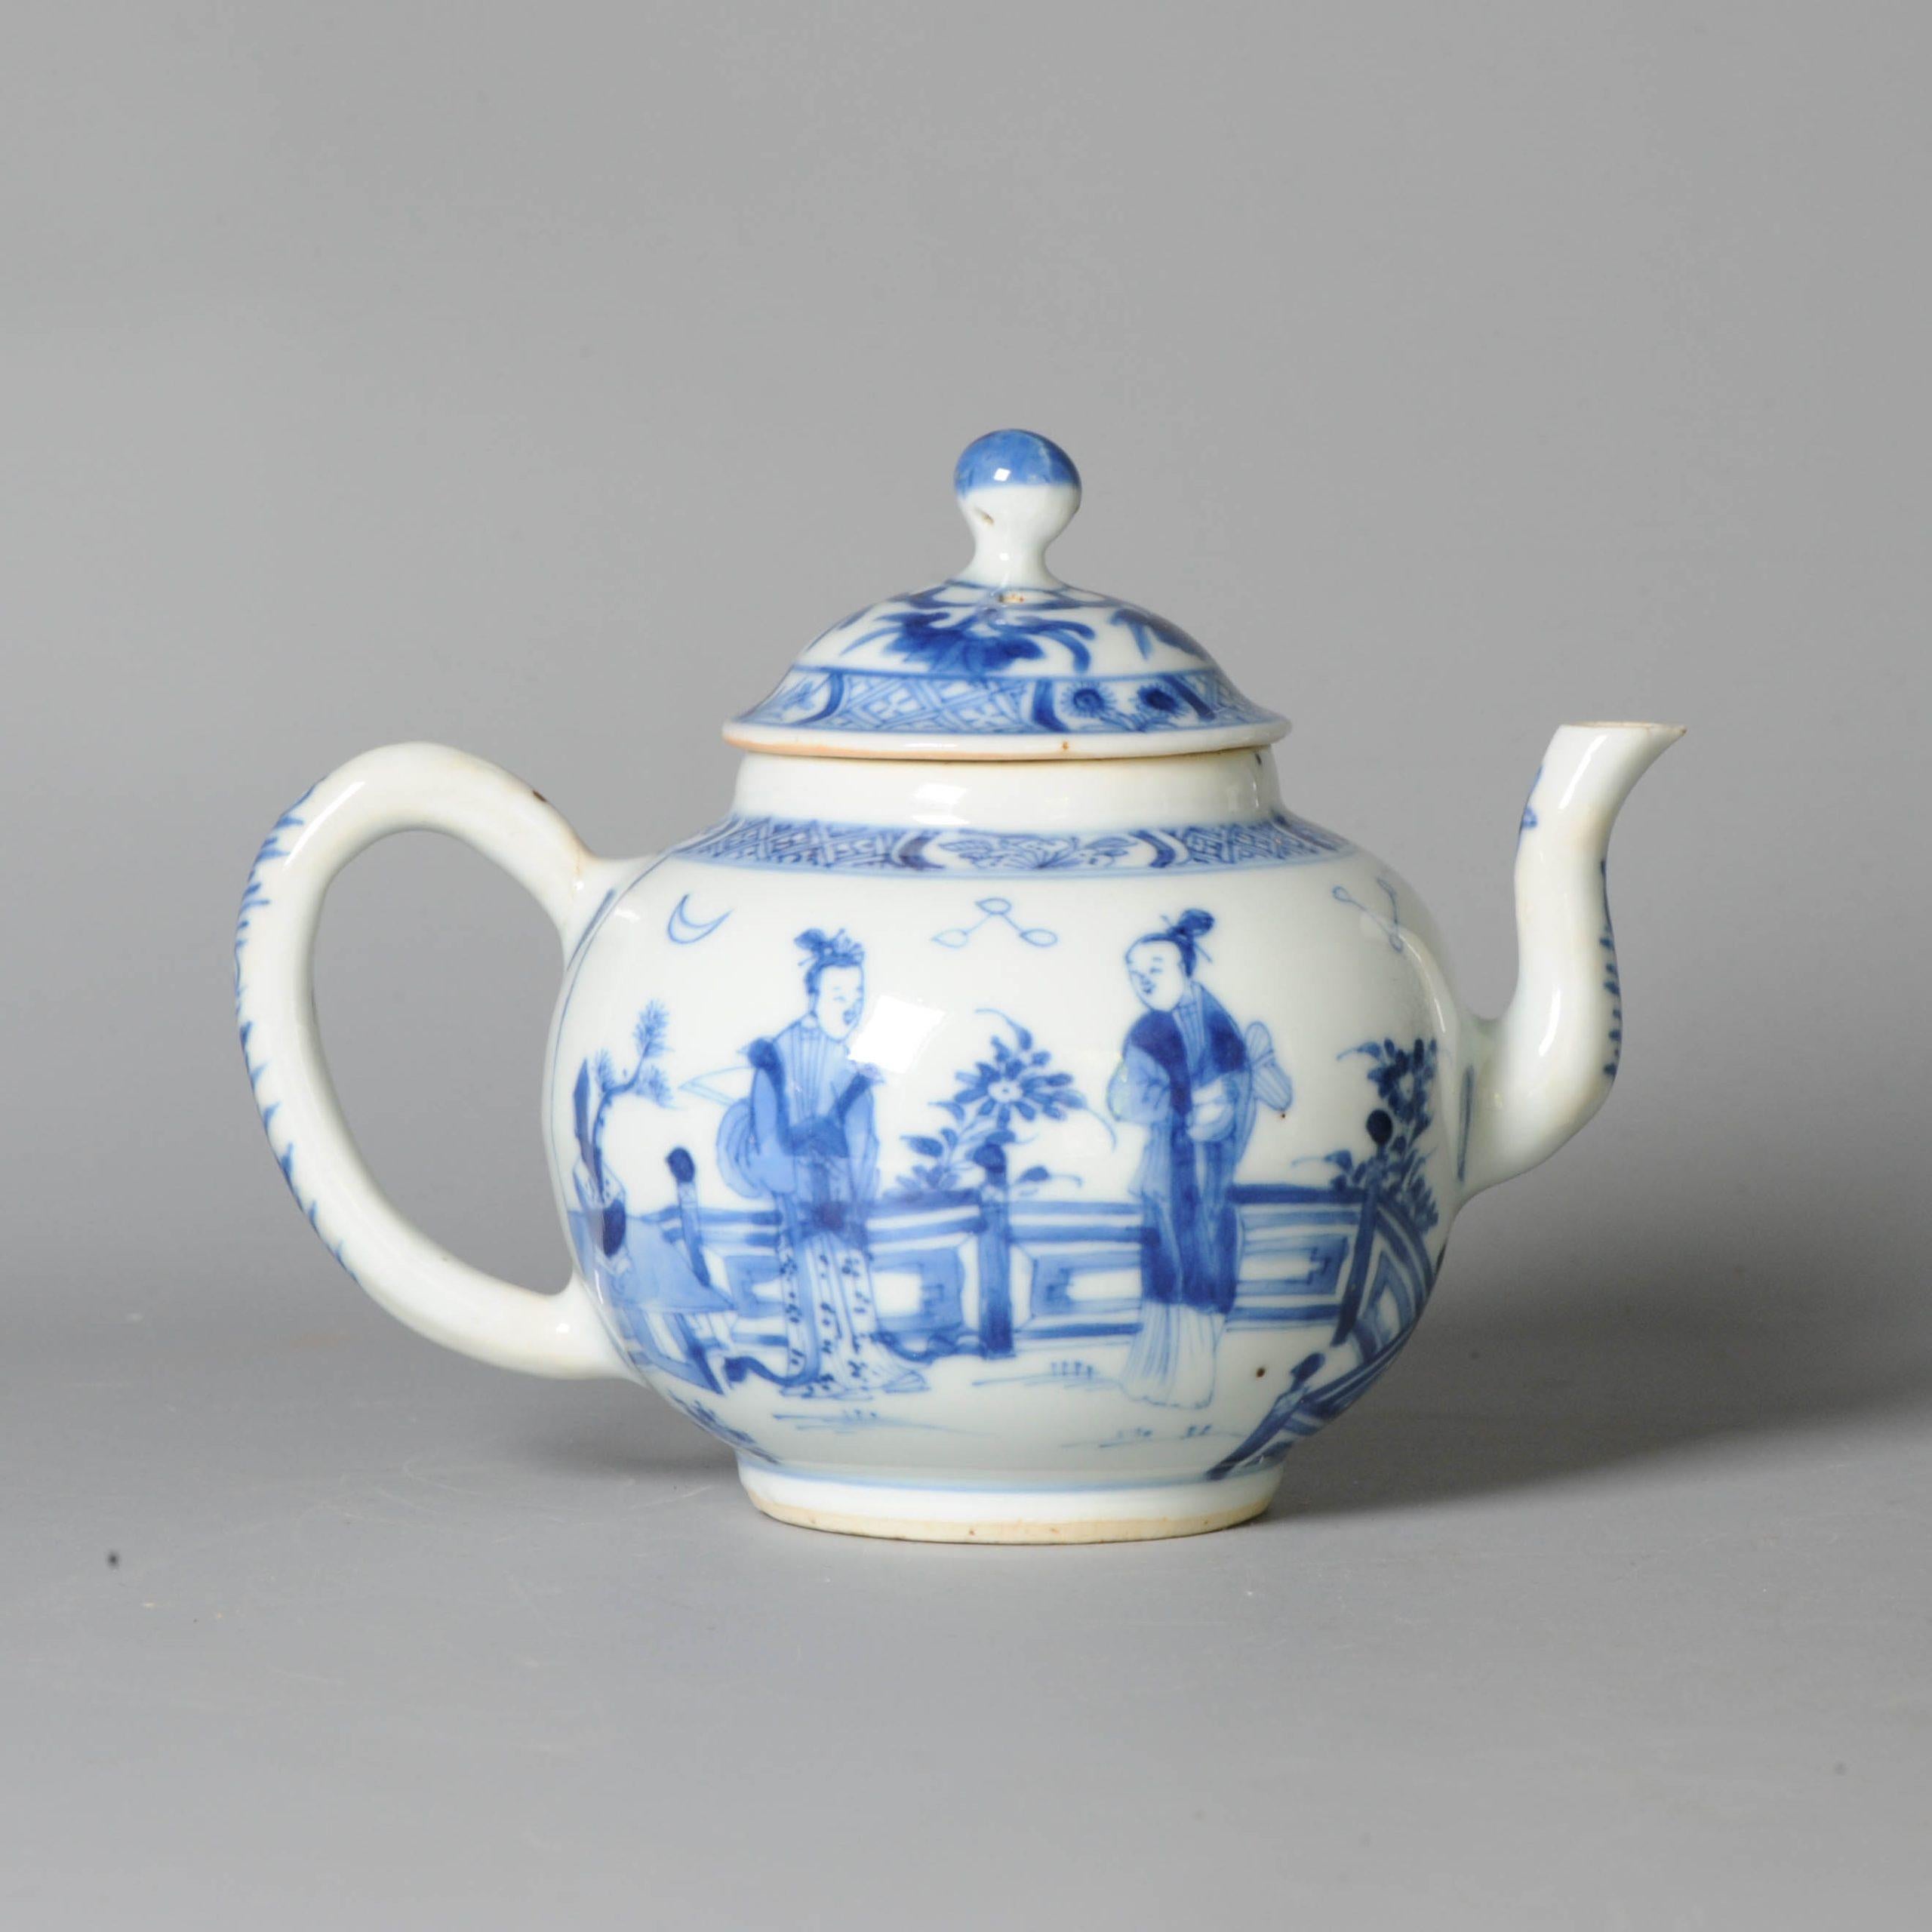 Kangxi in all it's delight, with a nicely painted scene of the Romance of the Western Chamber. Rare on a teapot

Unmarked at base.

Condition
Lid perfect, just some firing flaws. Pot with circular line to upper handle, a fritspot and a spot